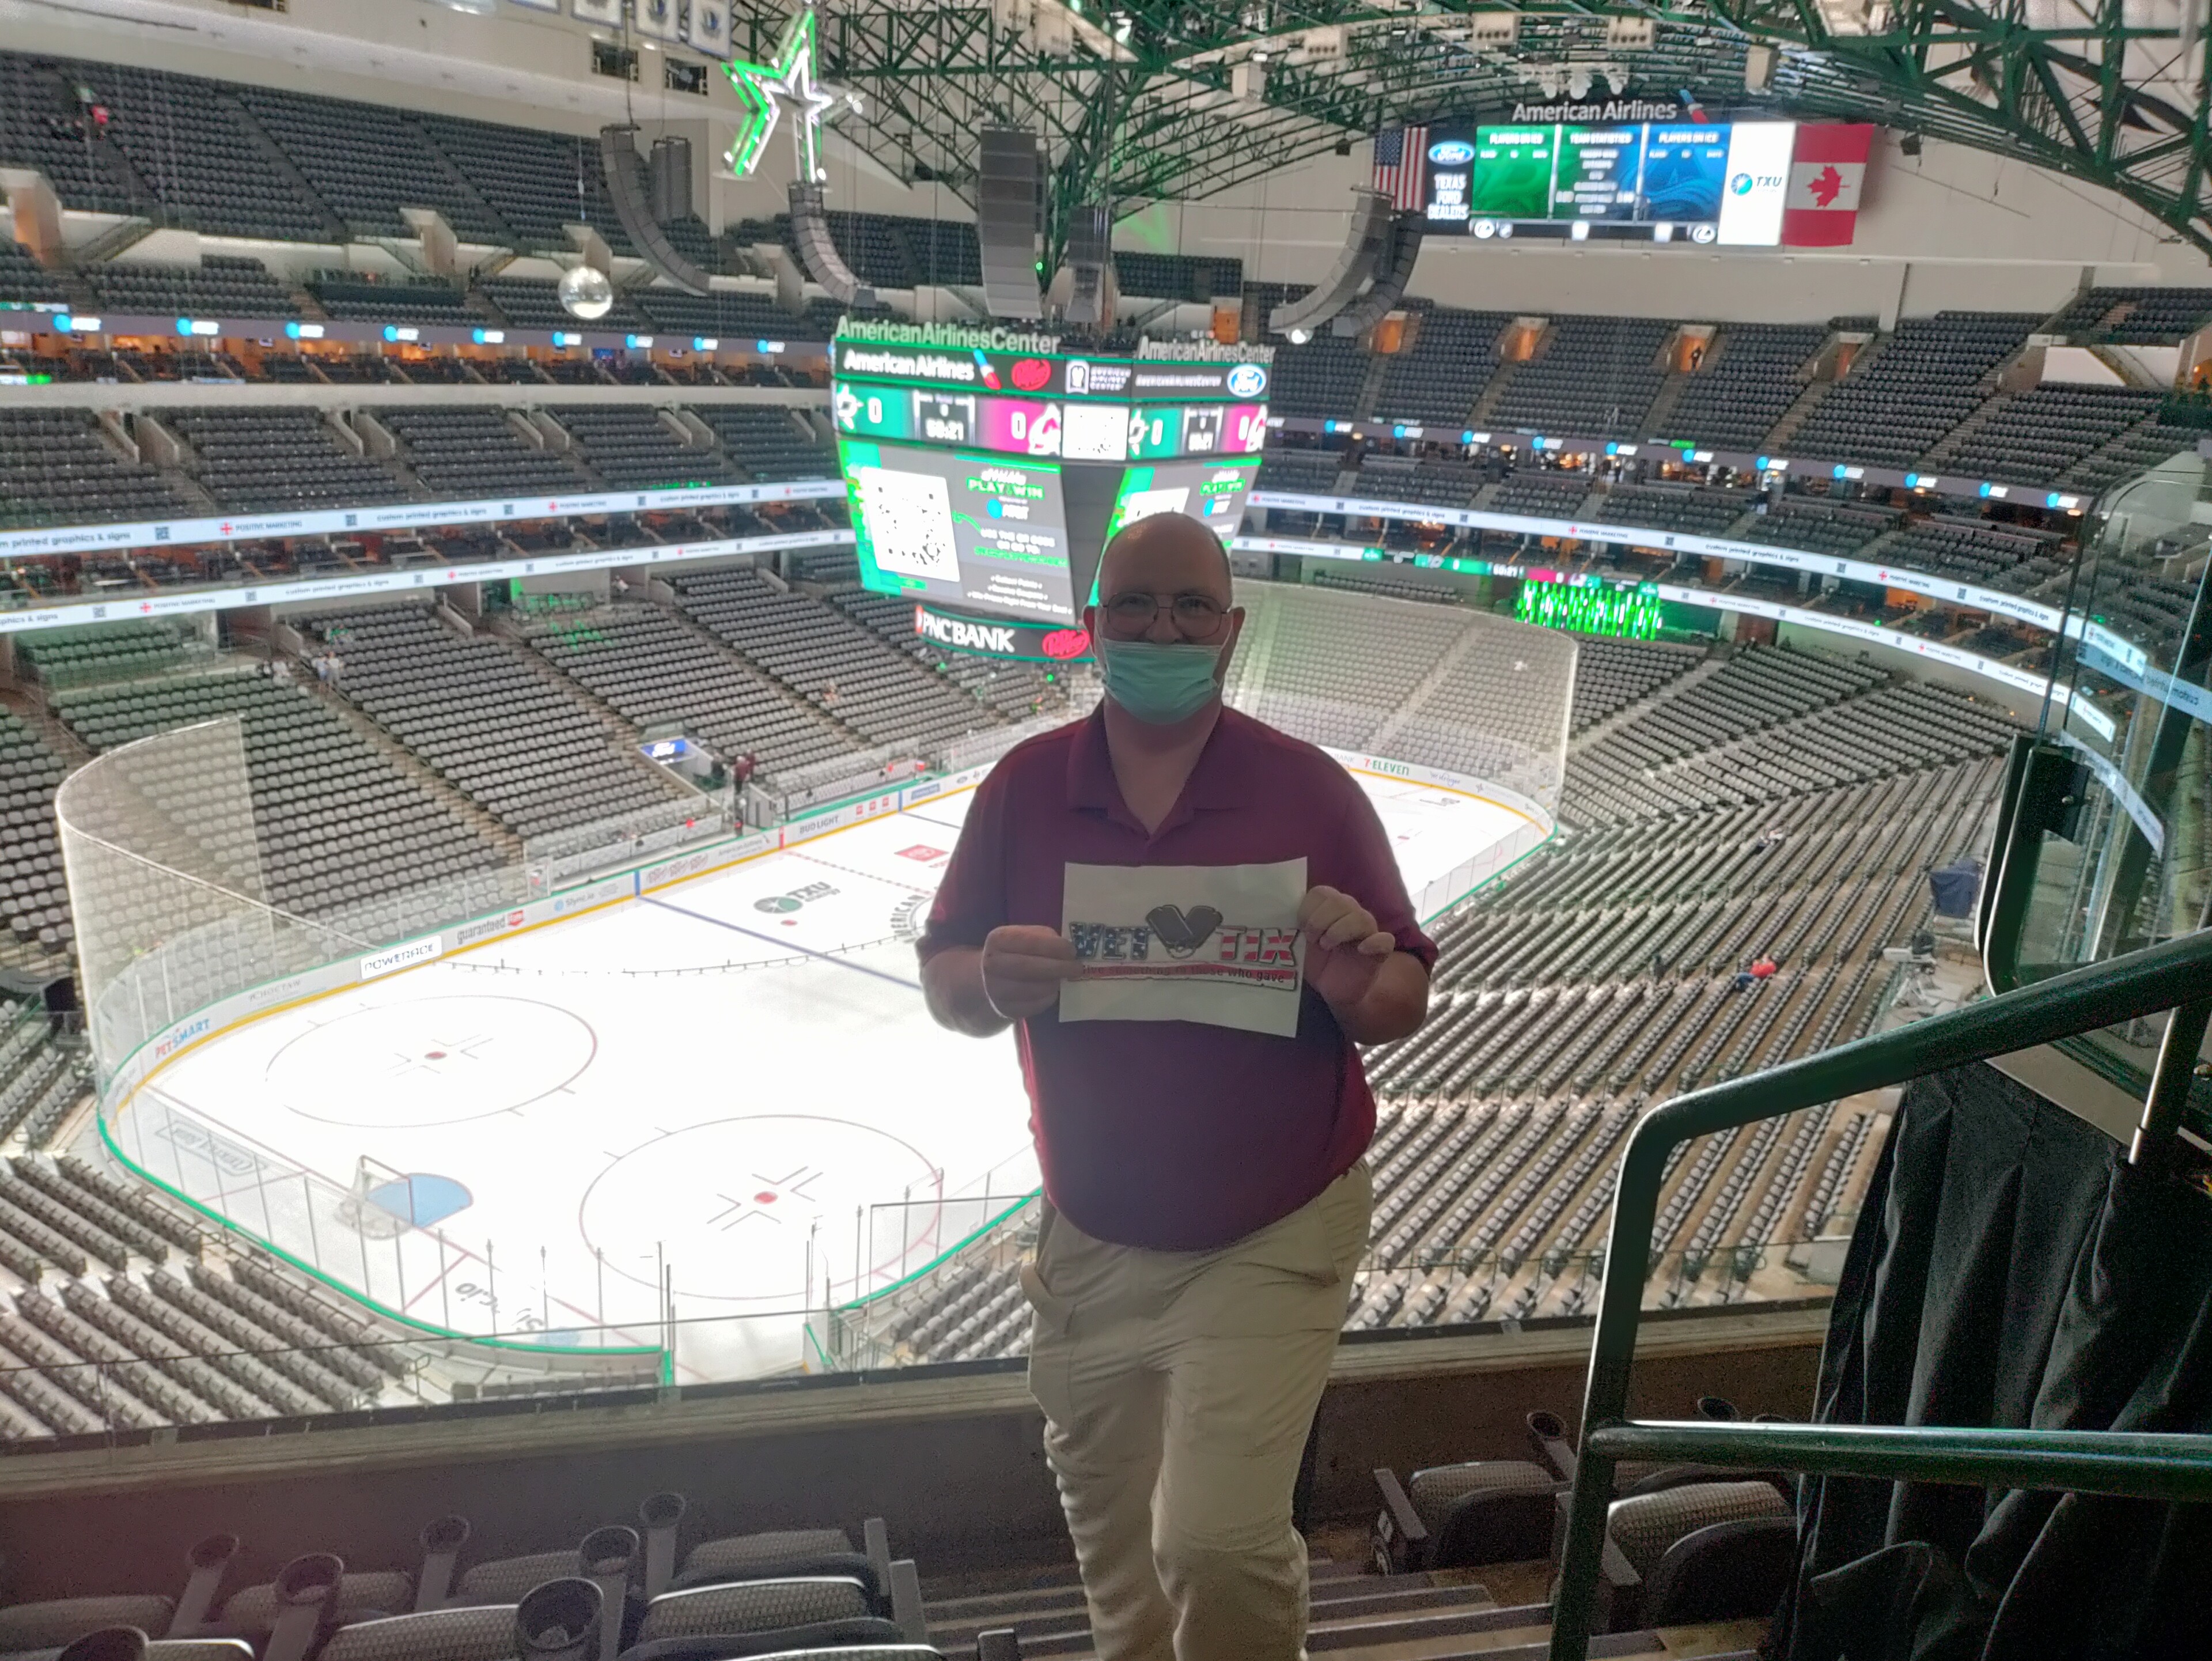 Dallas Stars return to the American Airlines Center to take on Avalanche